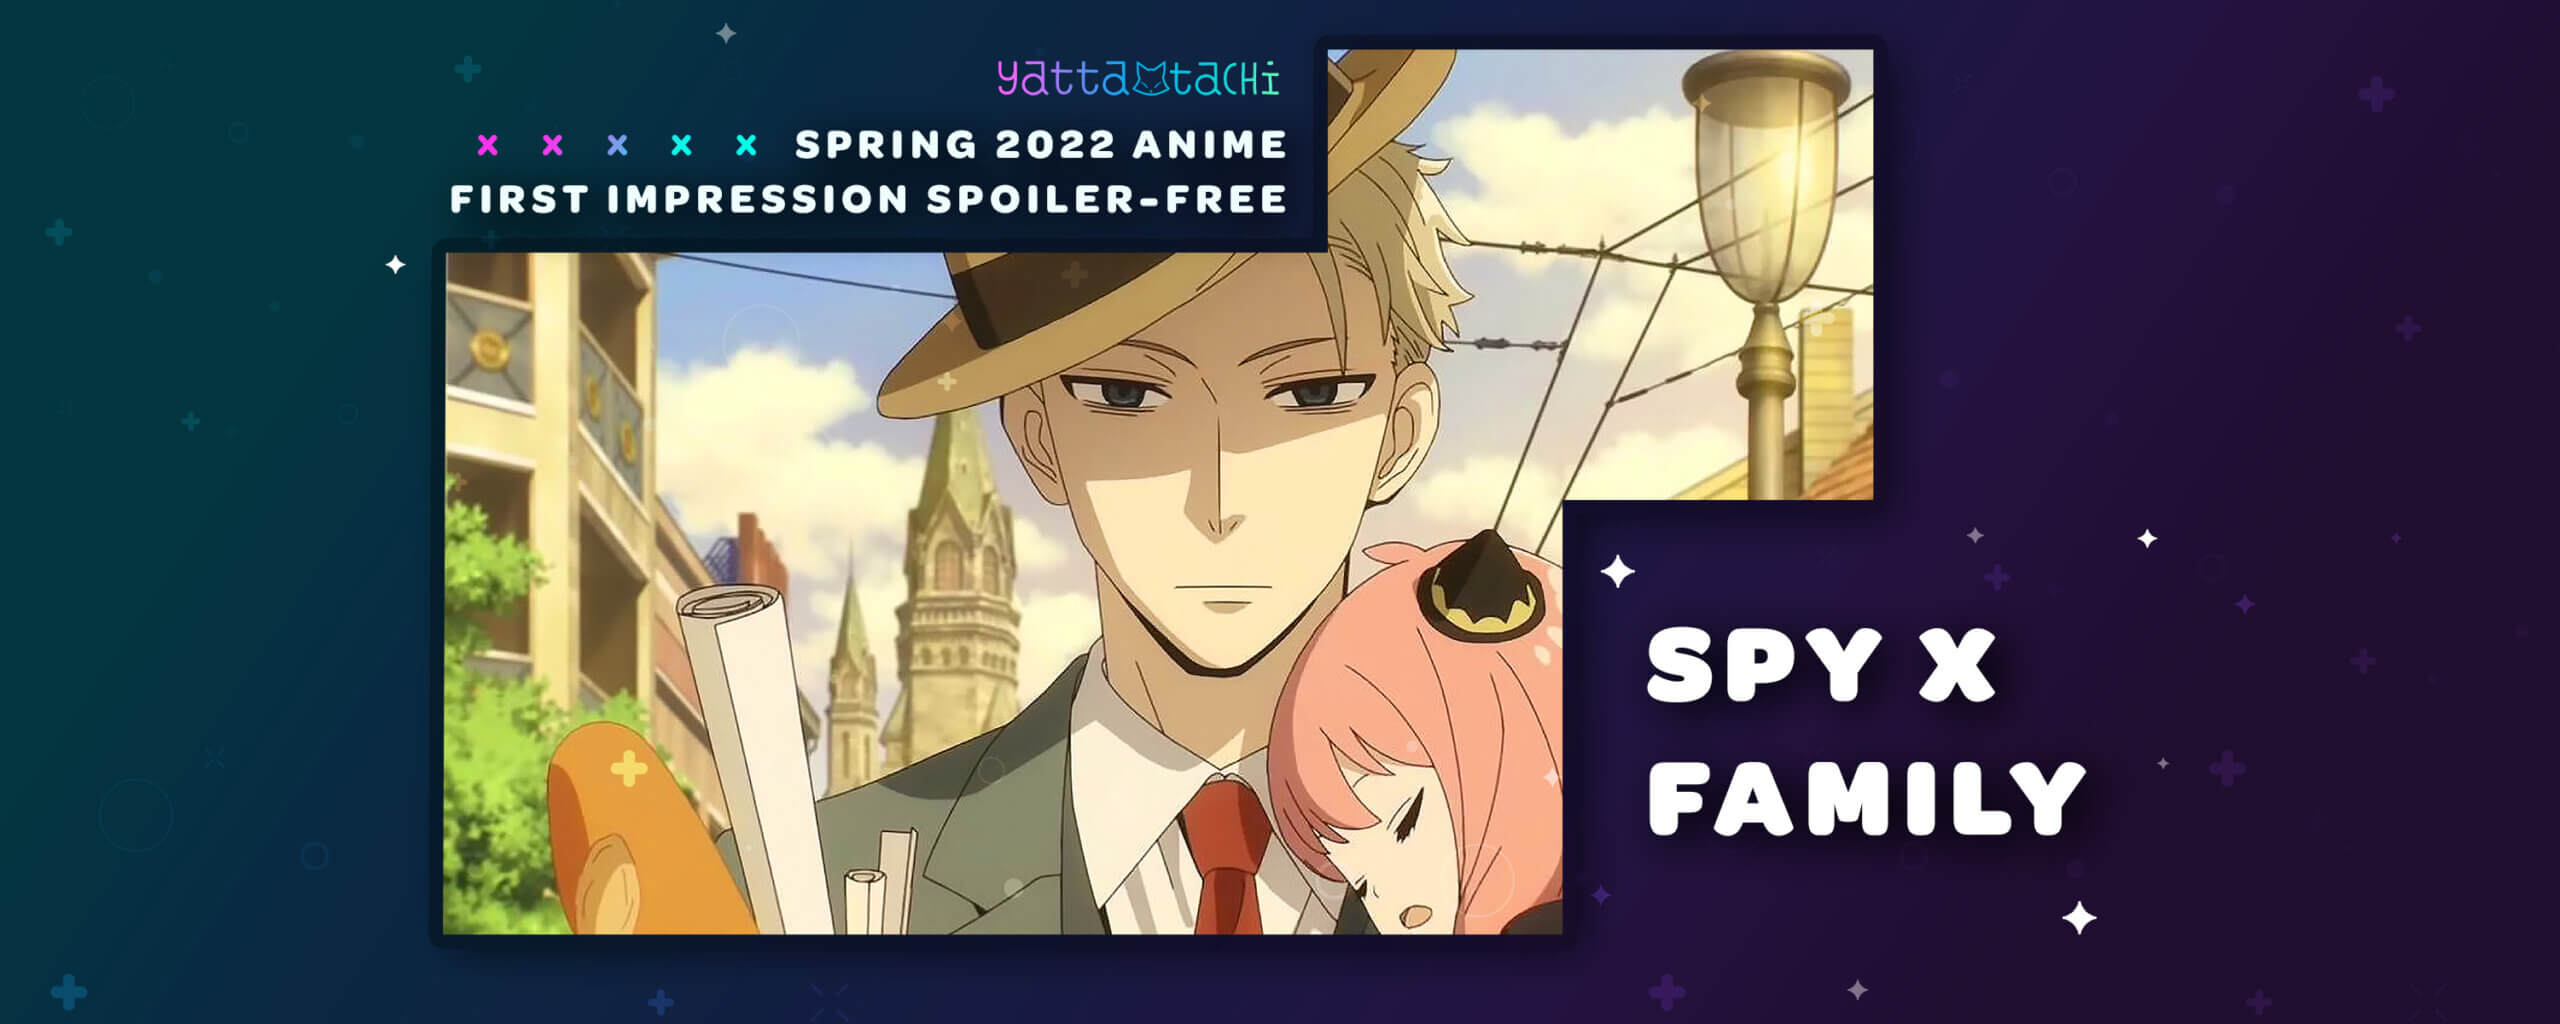 Spy X Family Parts 1/2 Anime Review - 71/100 - Star Crossed Anime